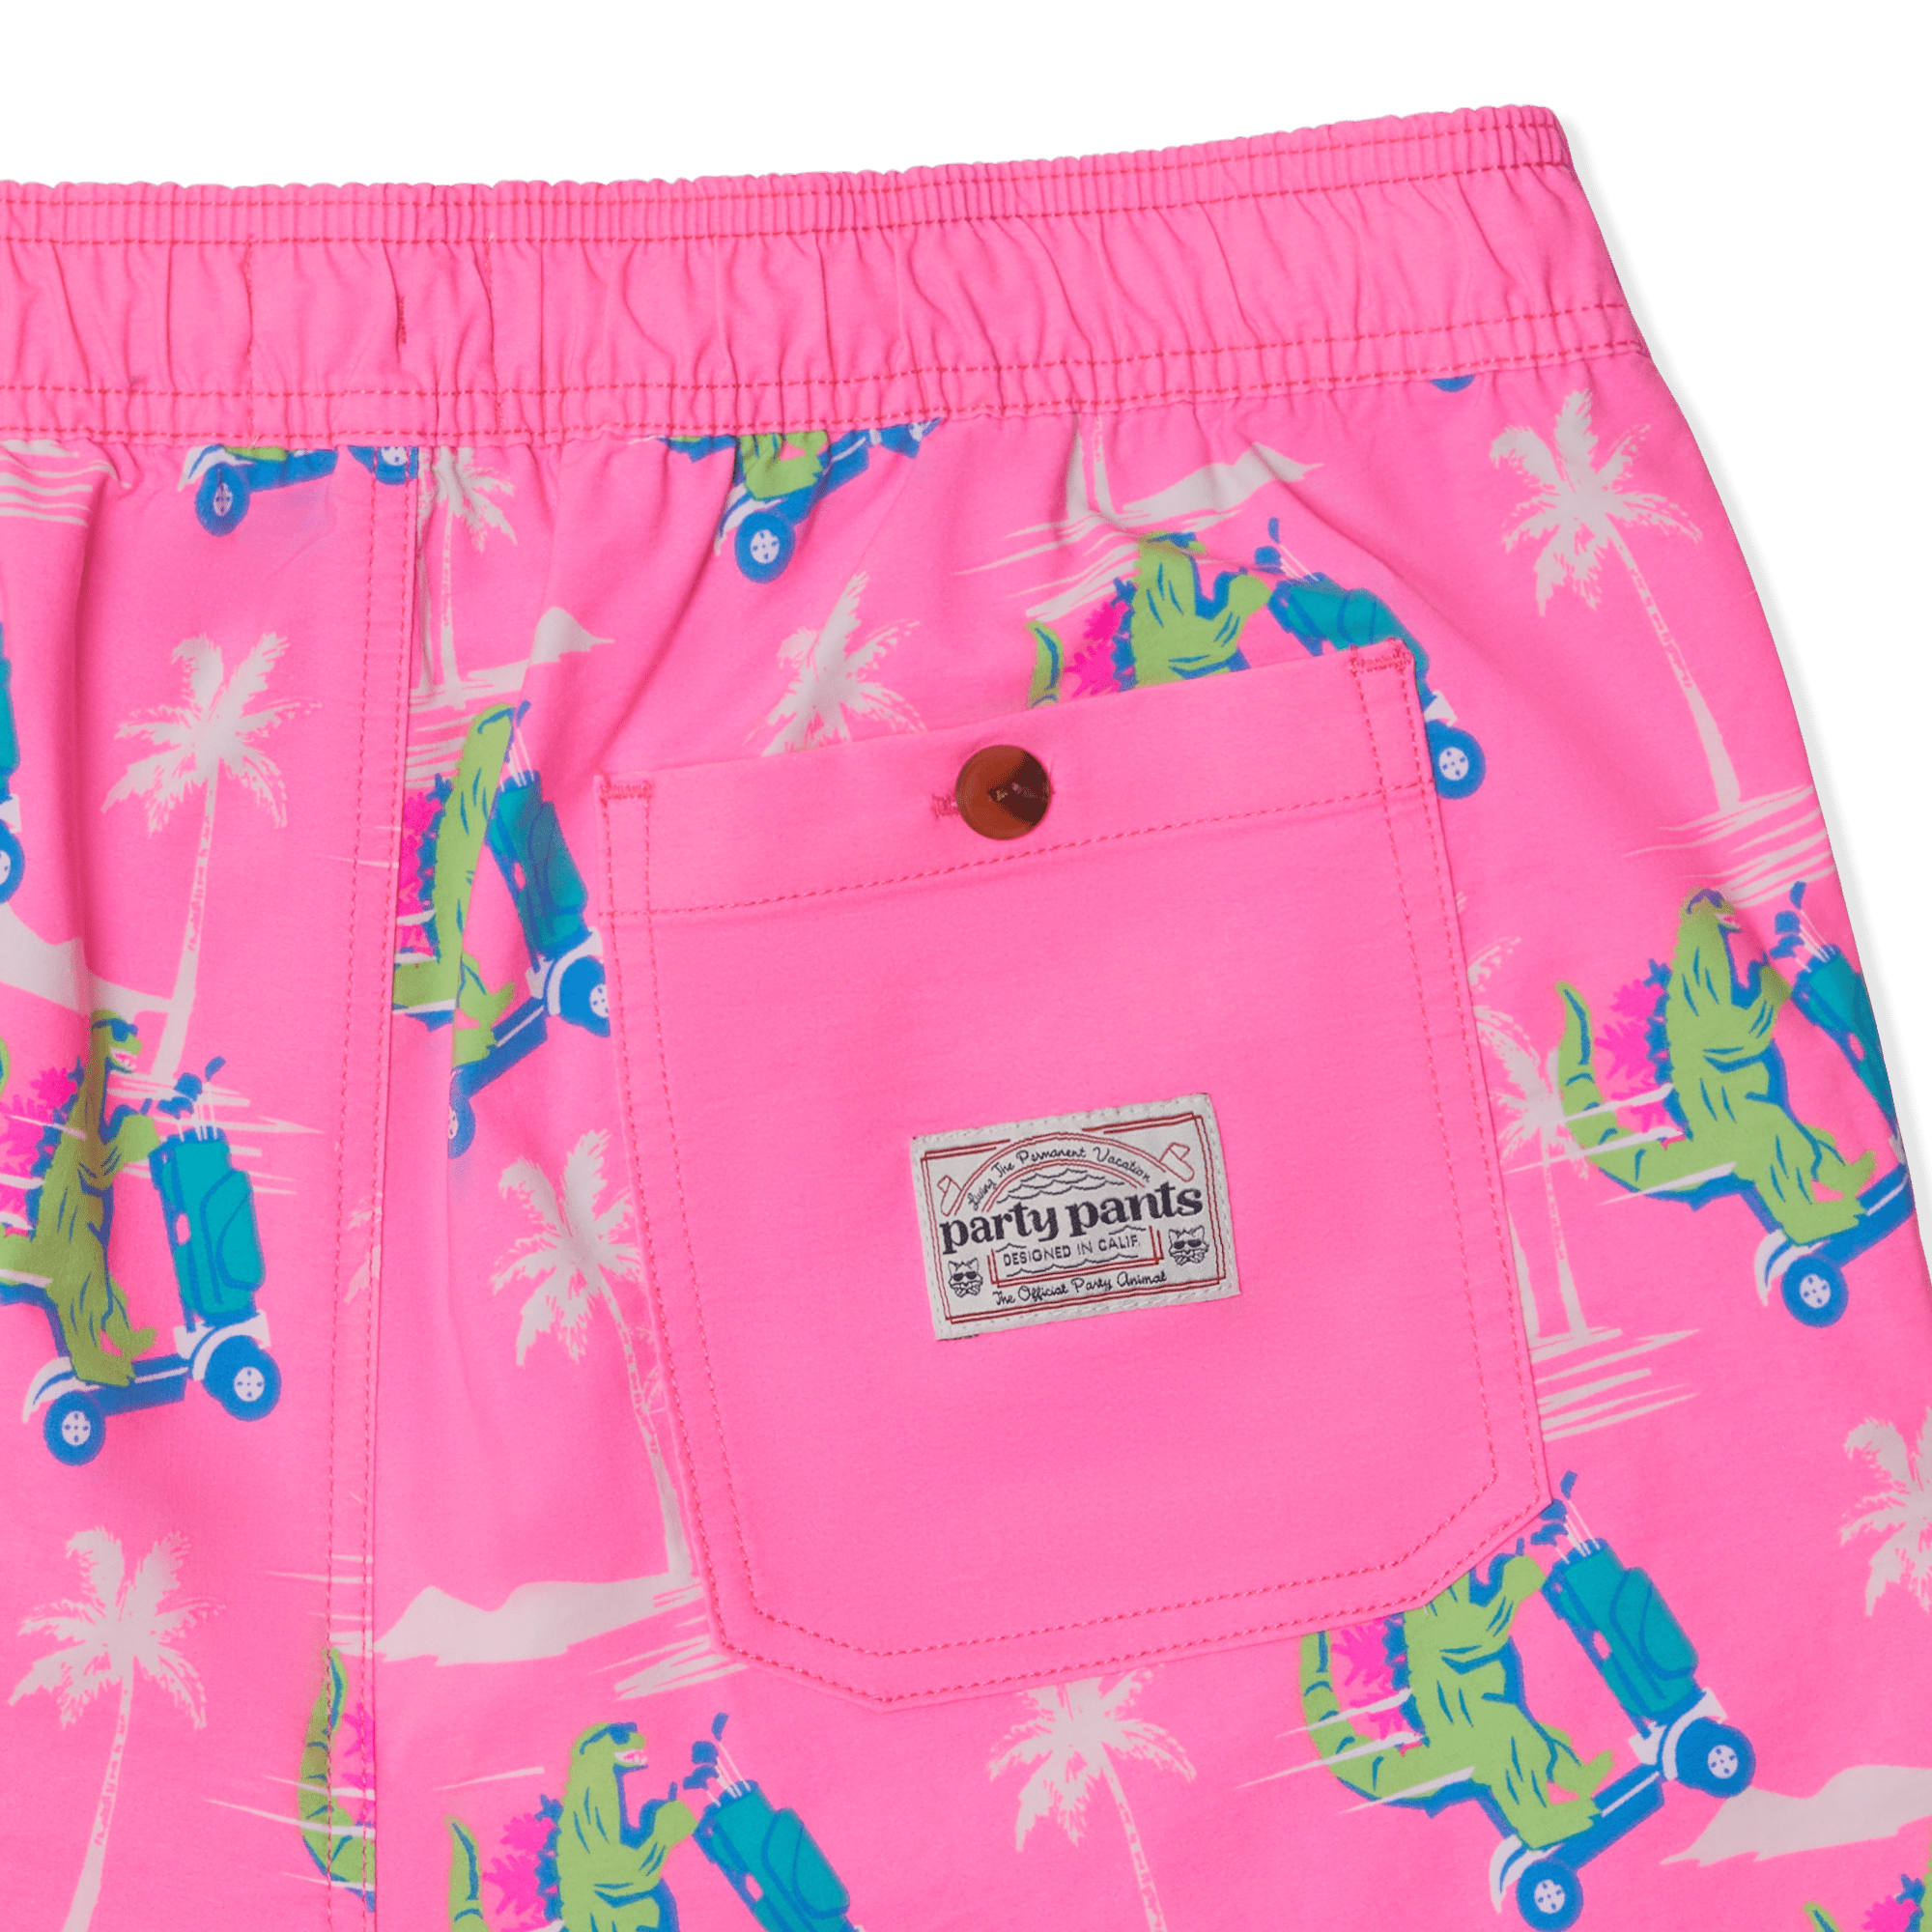 RIPPERS REVENGE PARTY STARTER SHORT - PINK PARTY STARTER SHORTS PARTY PANTS 